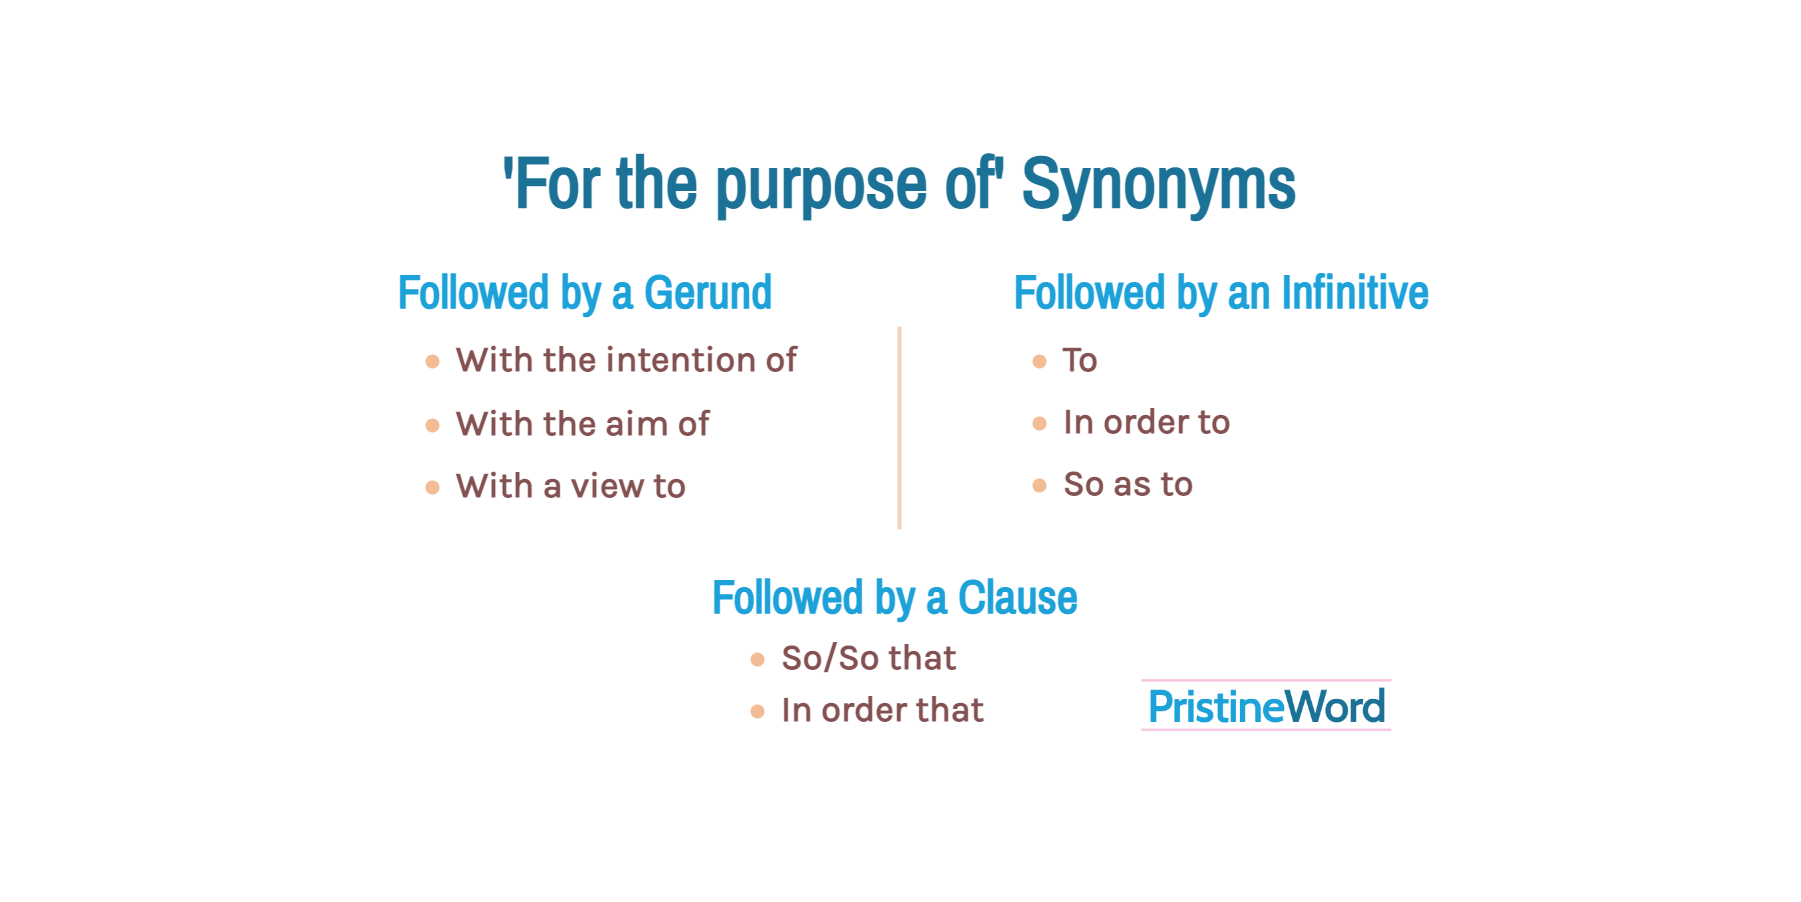 'For the Purpose of' Synonyms